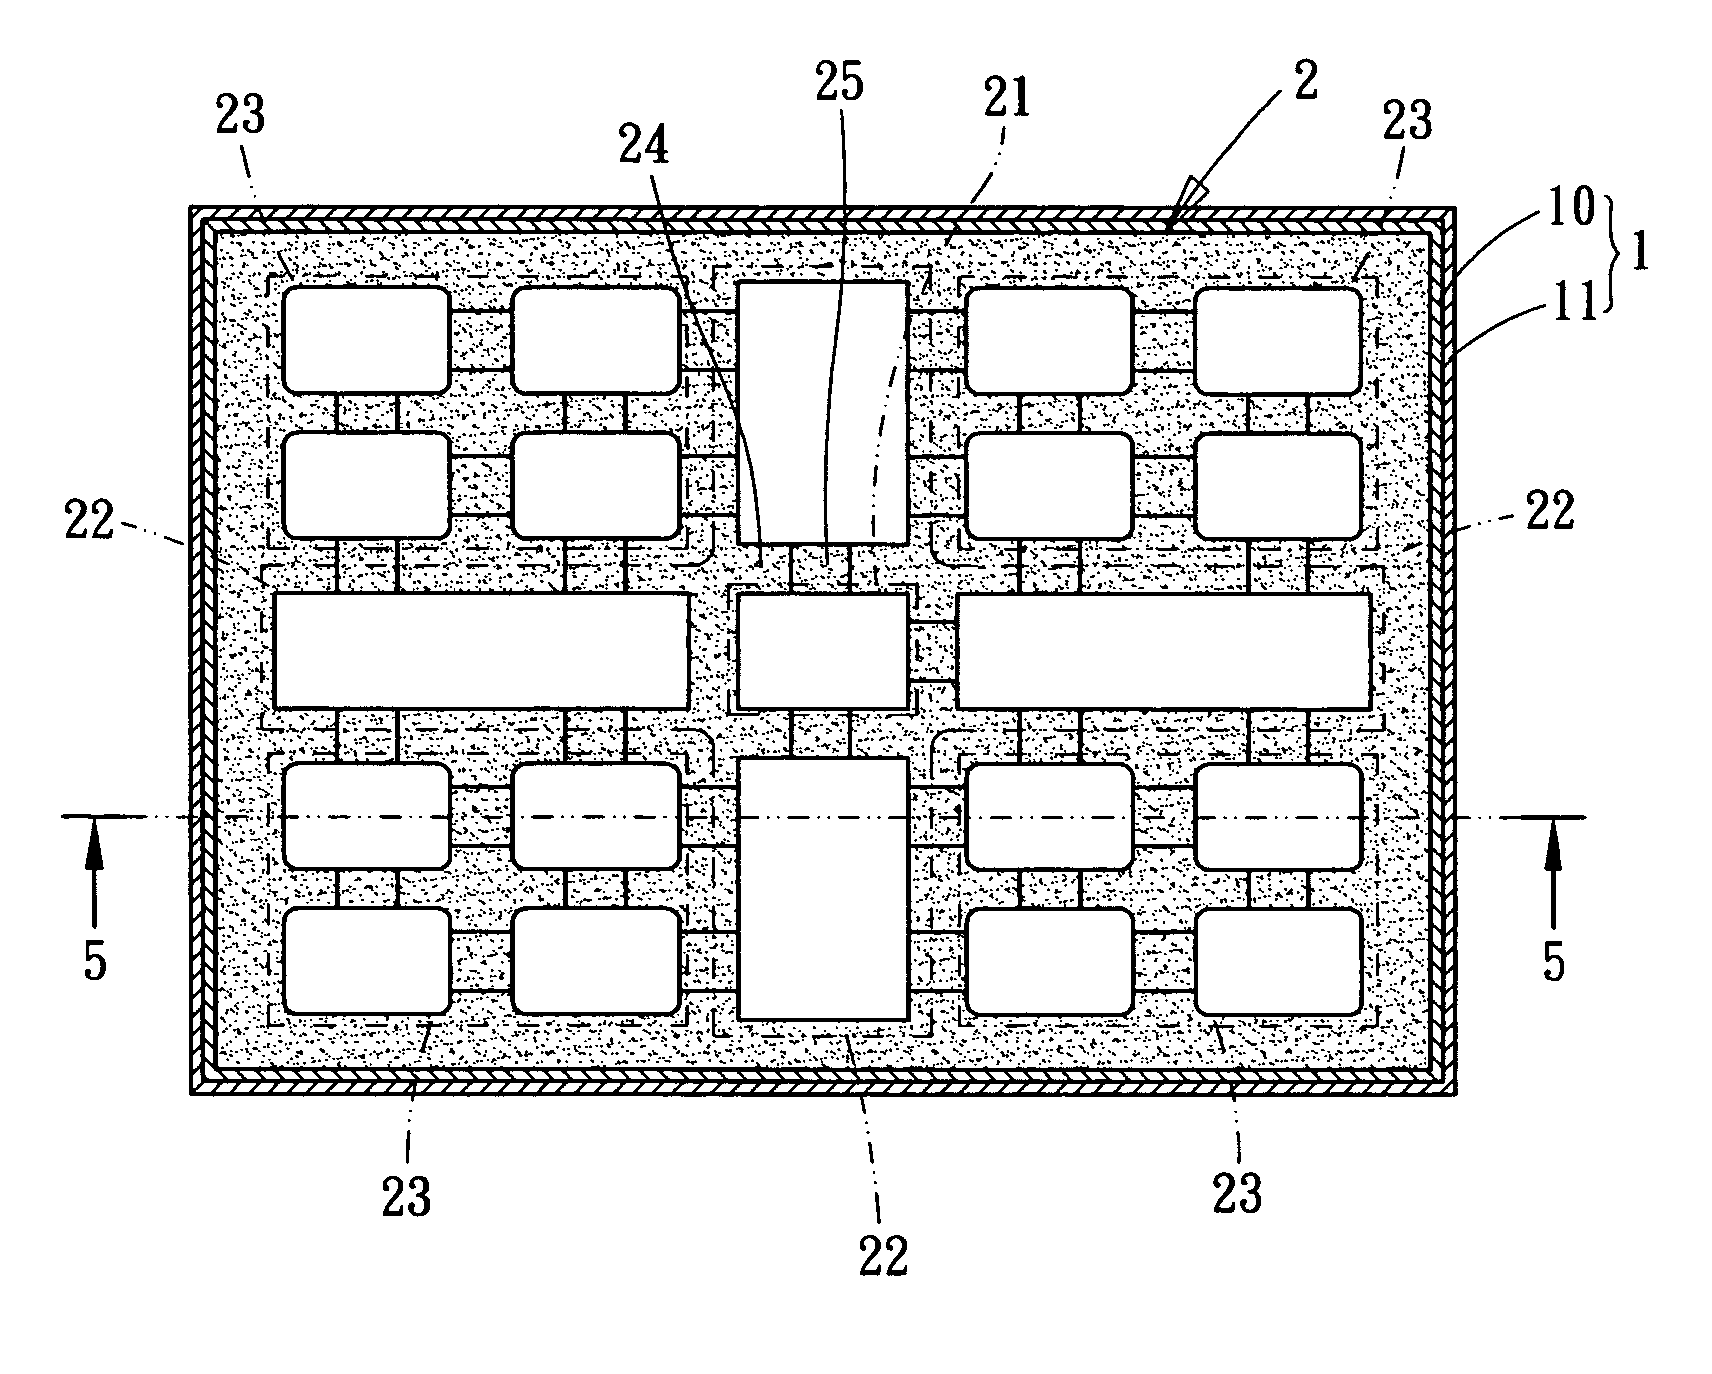 Supporting structure for planar heat pipe